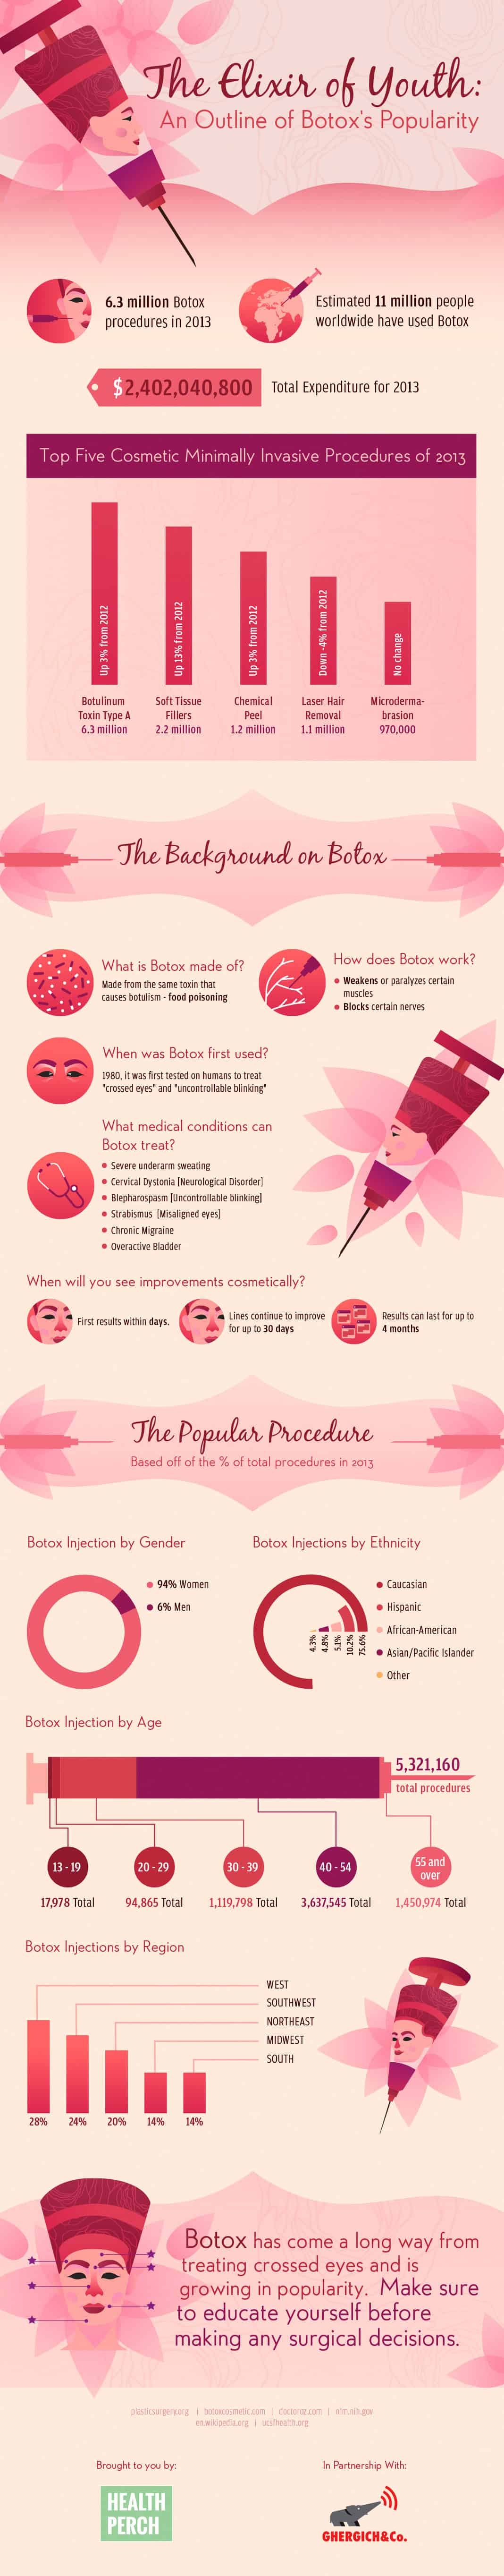 Botox  - The Elixir of Youth - An Outline of Botox's Popularity